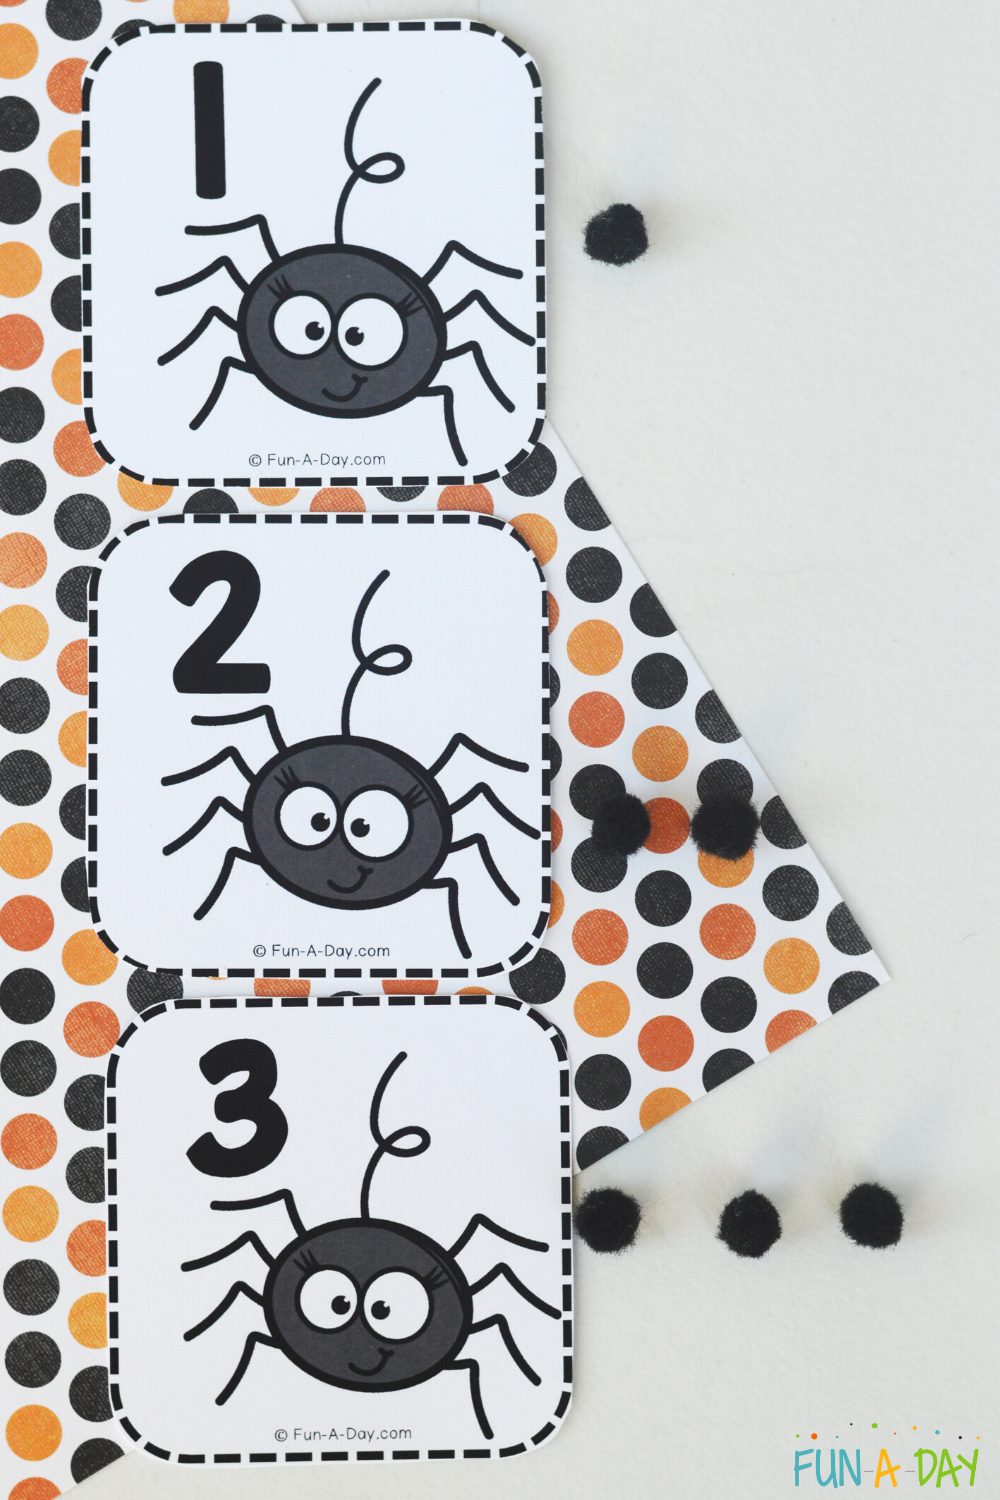 Spider calendar numbers 1, 2, 3 with corresponding number of black pompoms next to each